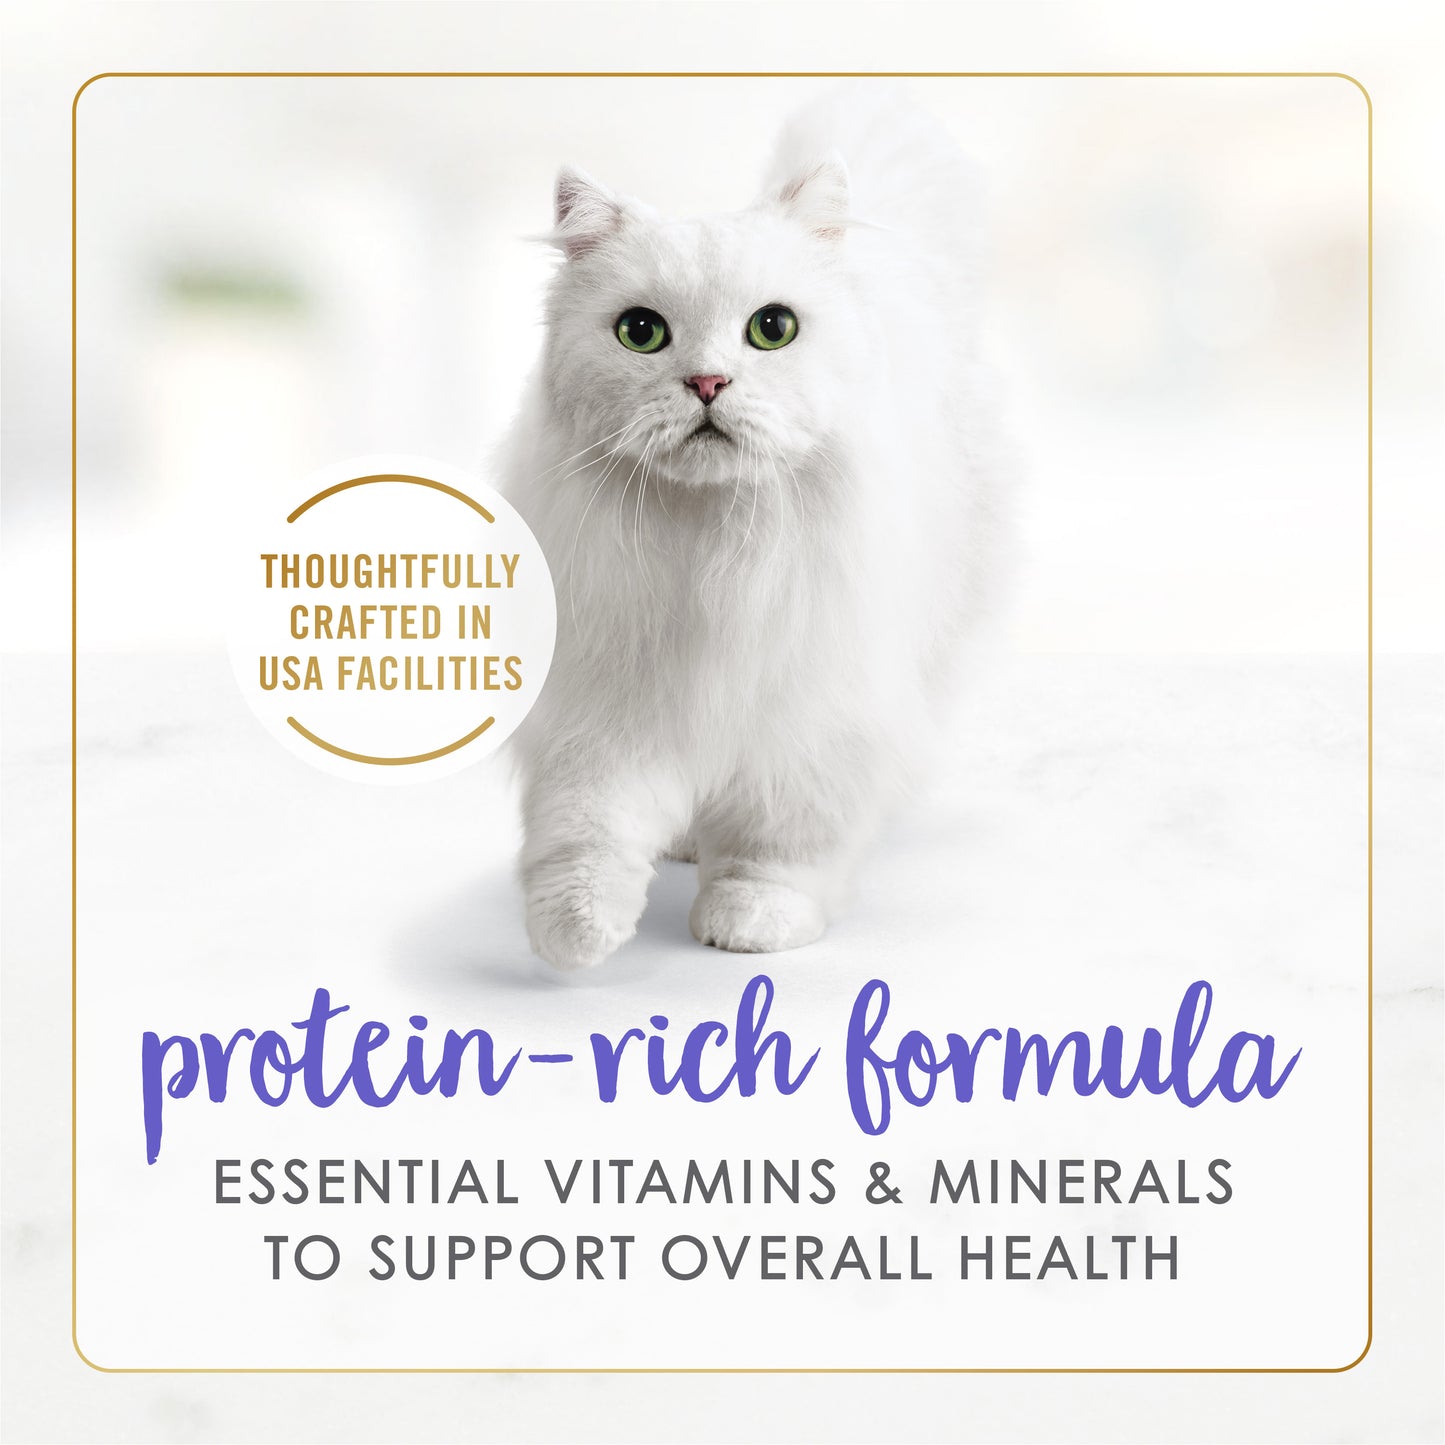 Protein-rich formula. Essential vitamins and minerals to support overall health. Thoughtfully crafted in USA facilities.